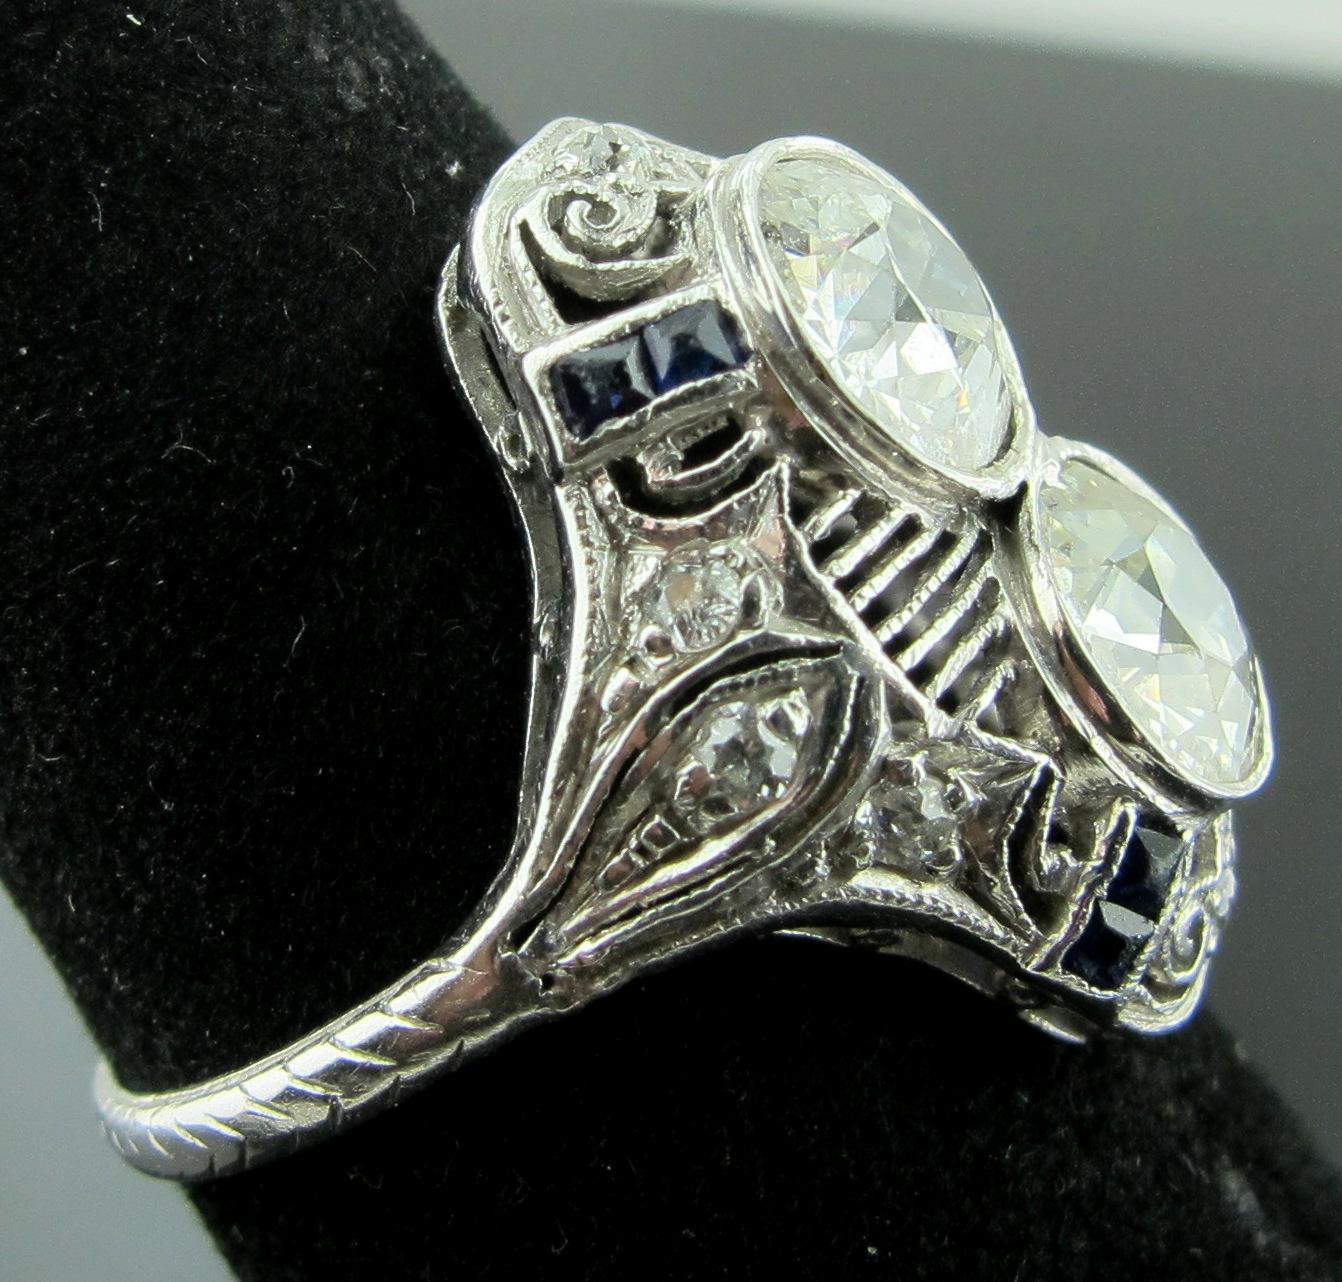 Vintage 1920's Diamond ring with two diamonds weighing approximately 1 carat each. Old European Cut diamonds with a total weight of 2.15 carats.  M-N Color, VS clarity and H-I Color, I1 Clarity.  8 additional Old European cut diamonds with a weight